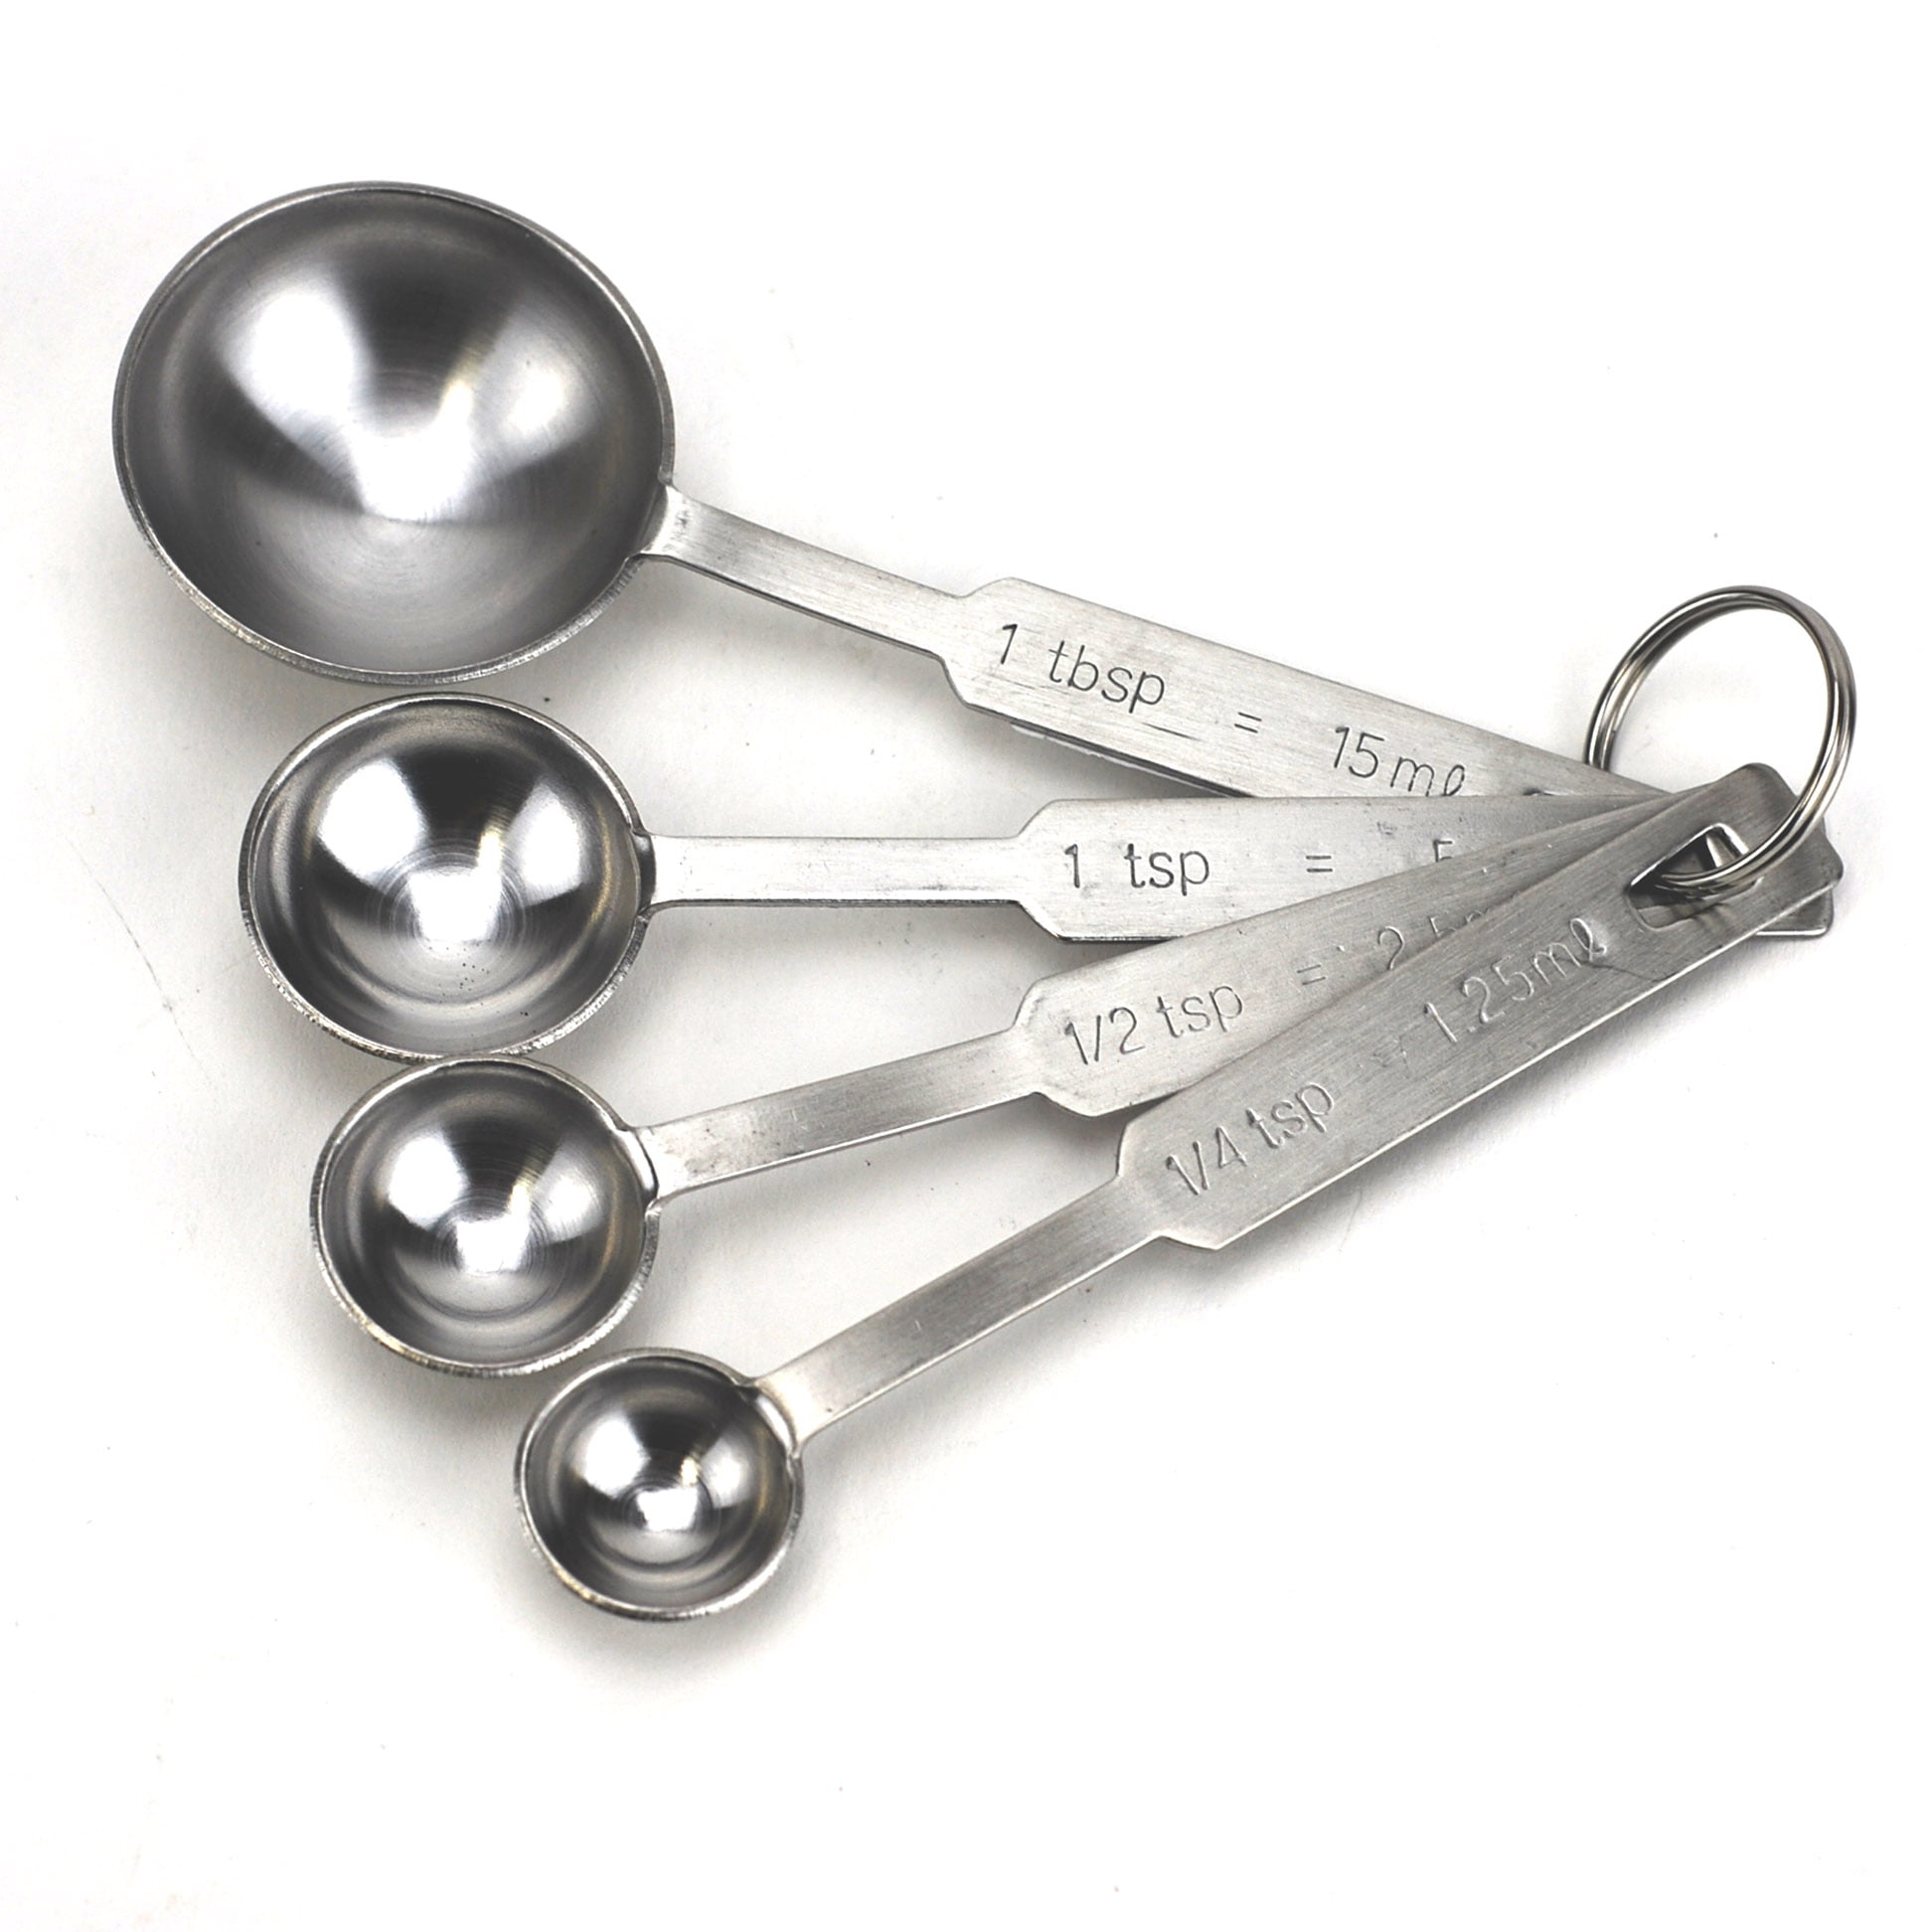 MINGLITAI 6Pcs Measuring Spoon Set, Stainless Steel Small Tablespoon,  Teaspoon with Level, Stackable Metal Measuring Spoons, Etched Markings and